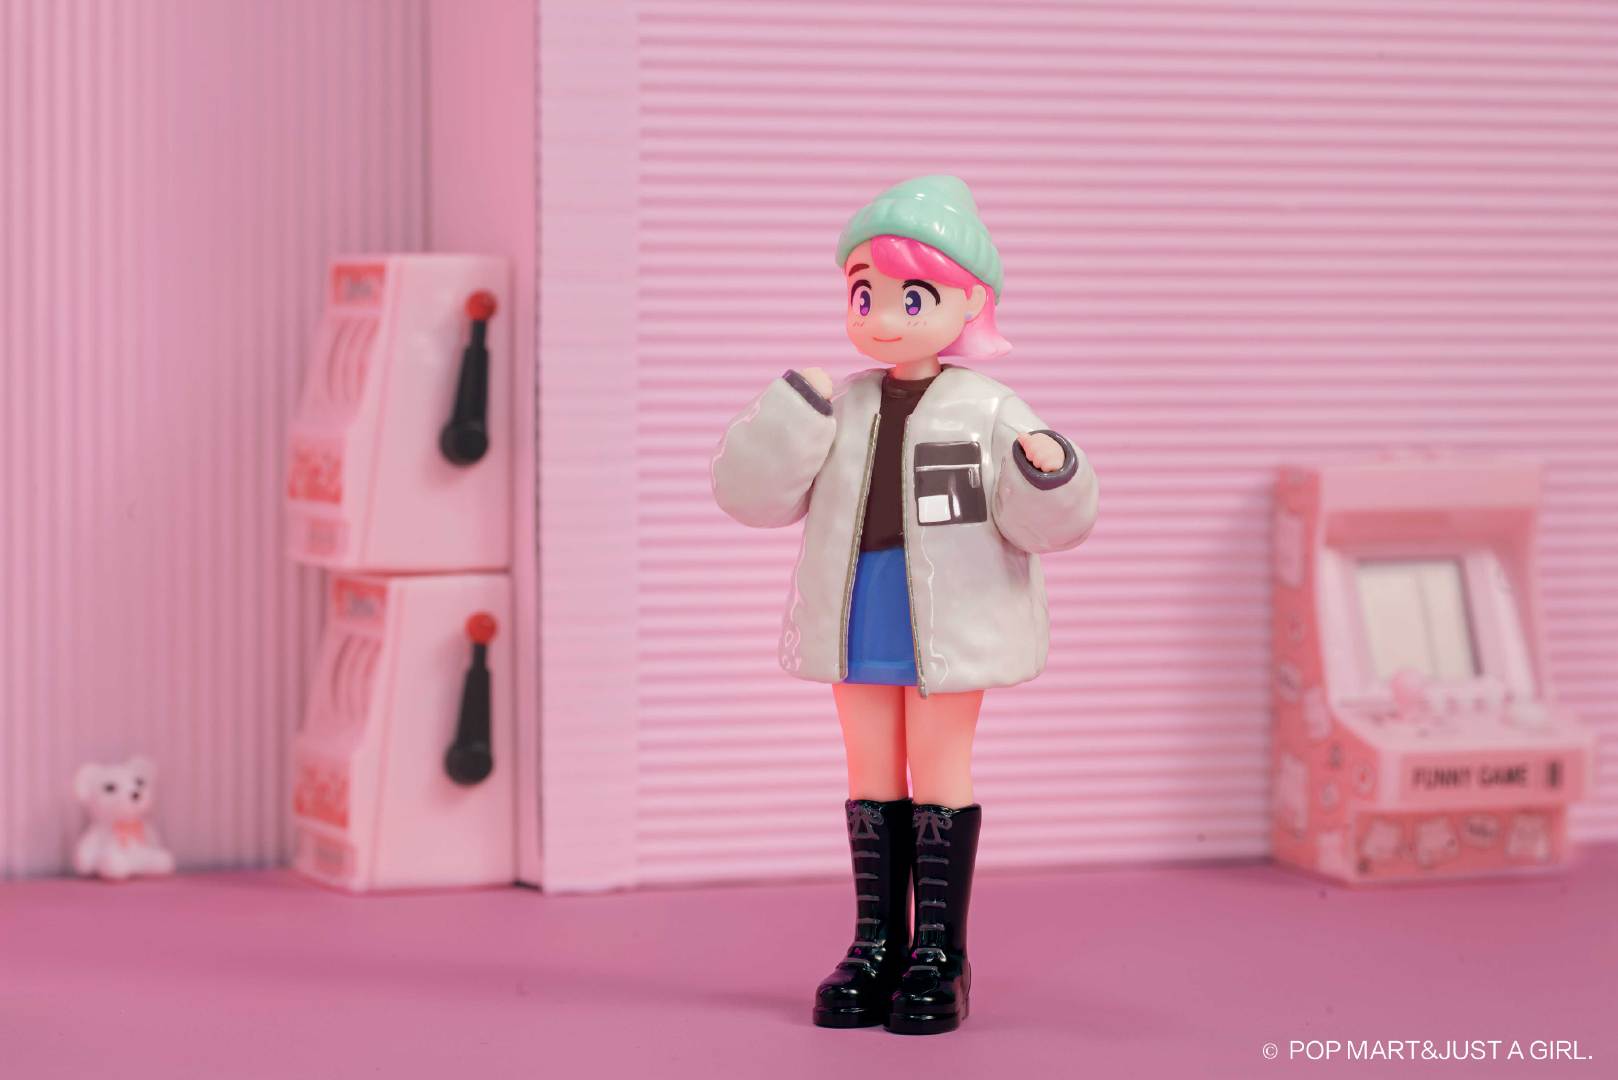 A toy figurine of a girl from JUST A GIRL NORI'S Morning Blind Box Series.